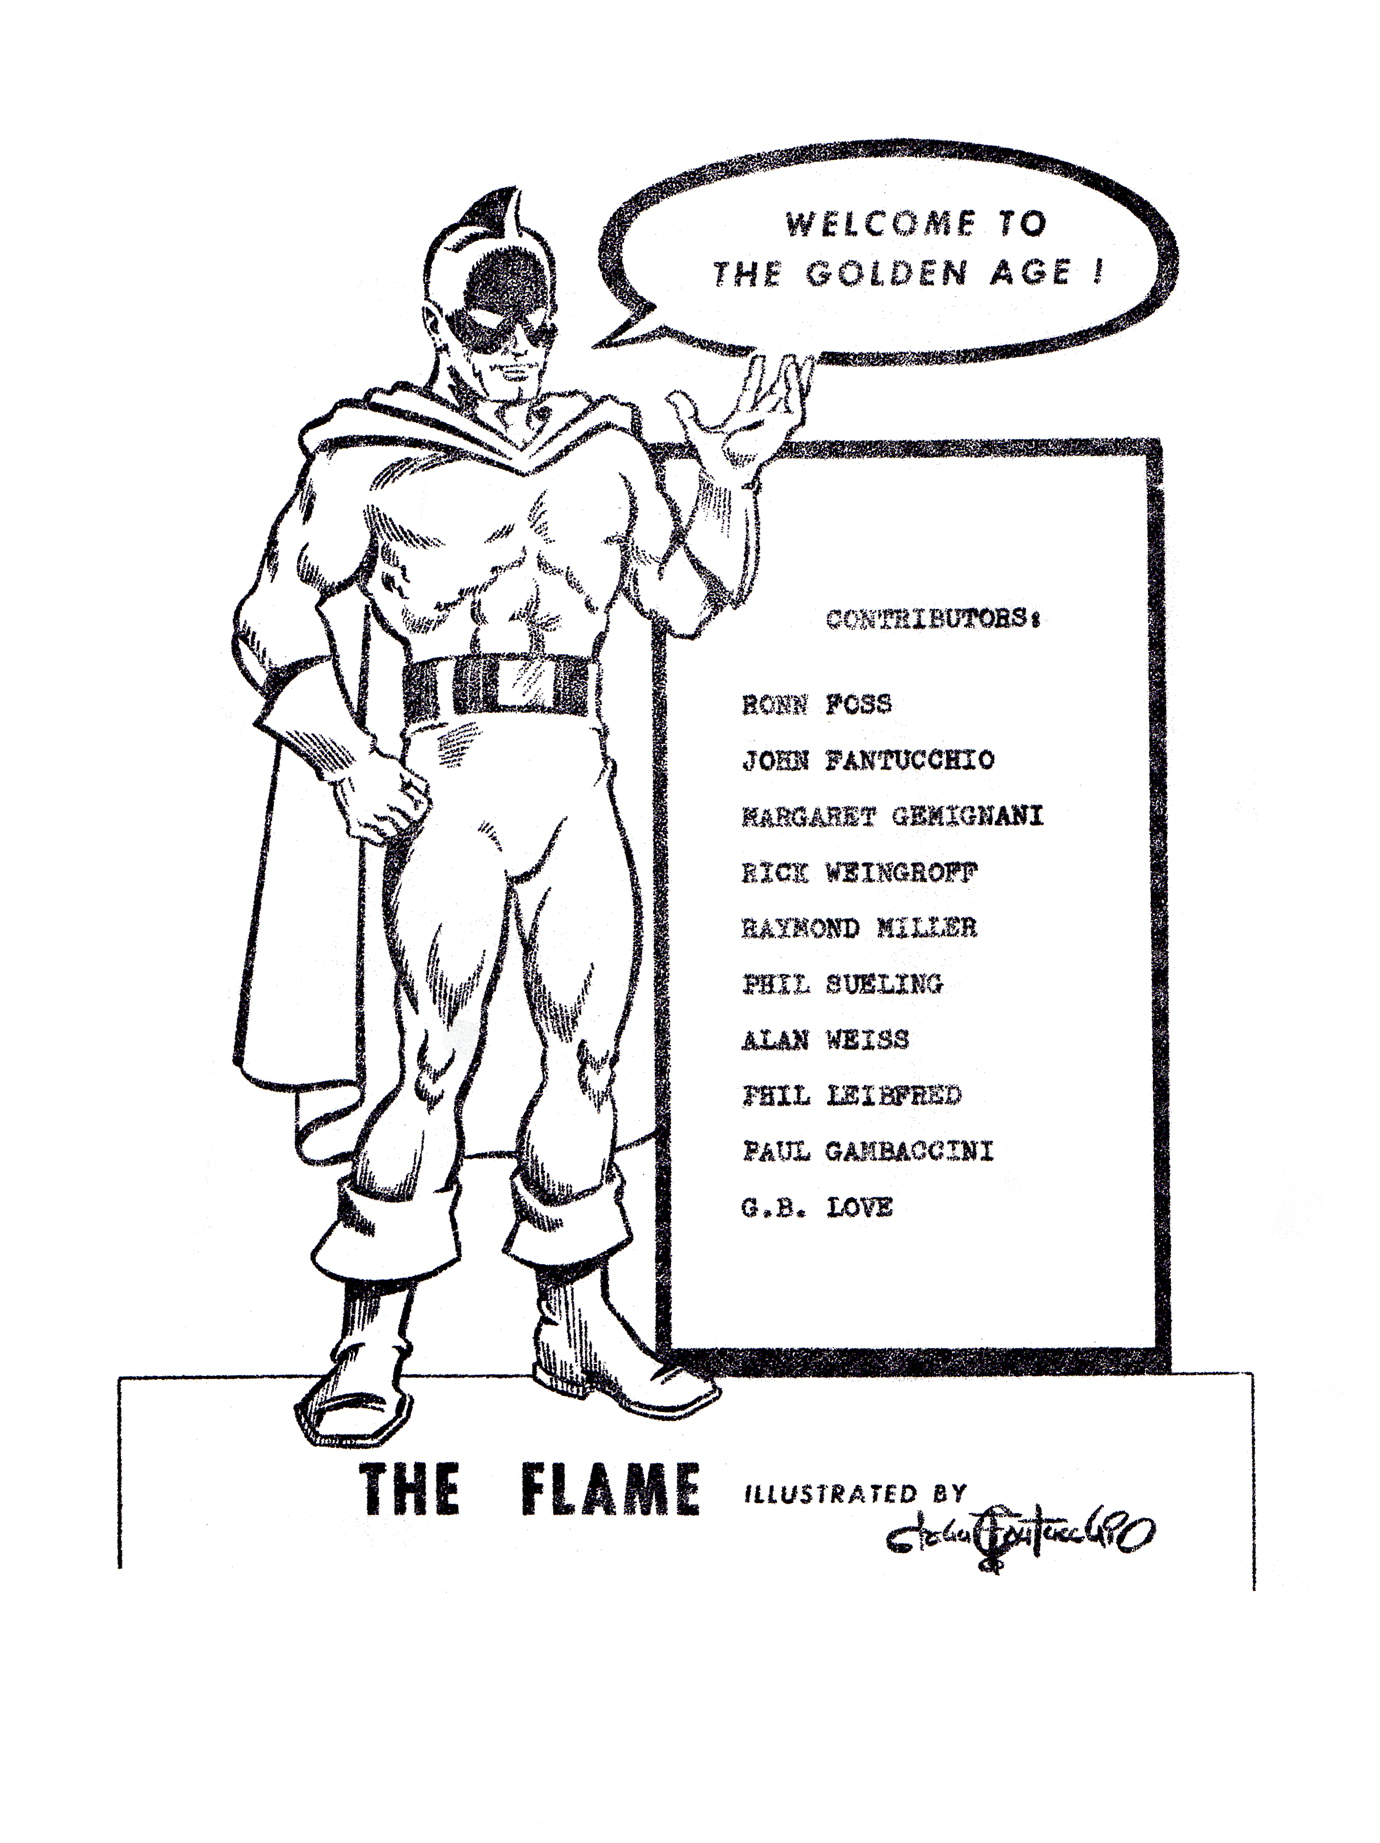 The Golden Age #1 Contents Page by John G Fantucchio